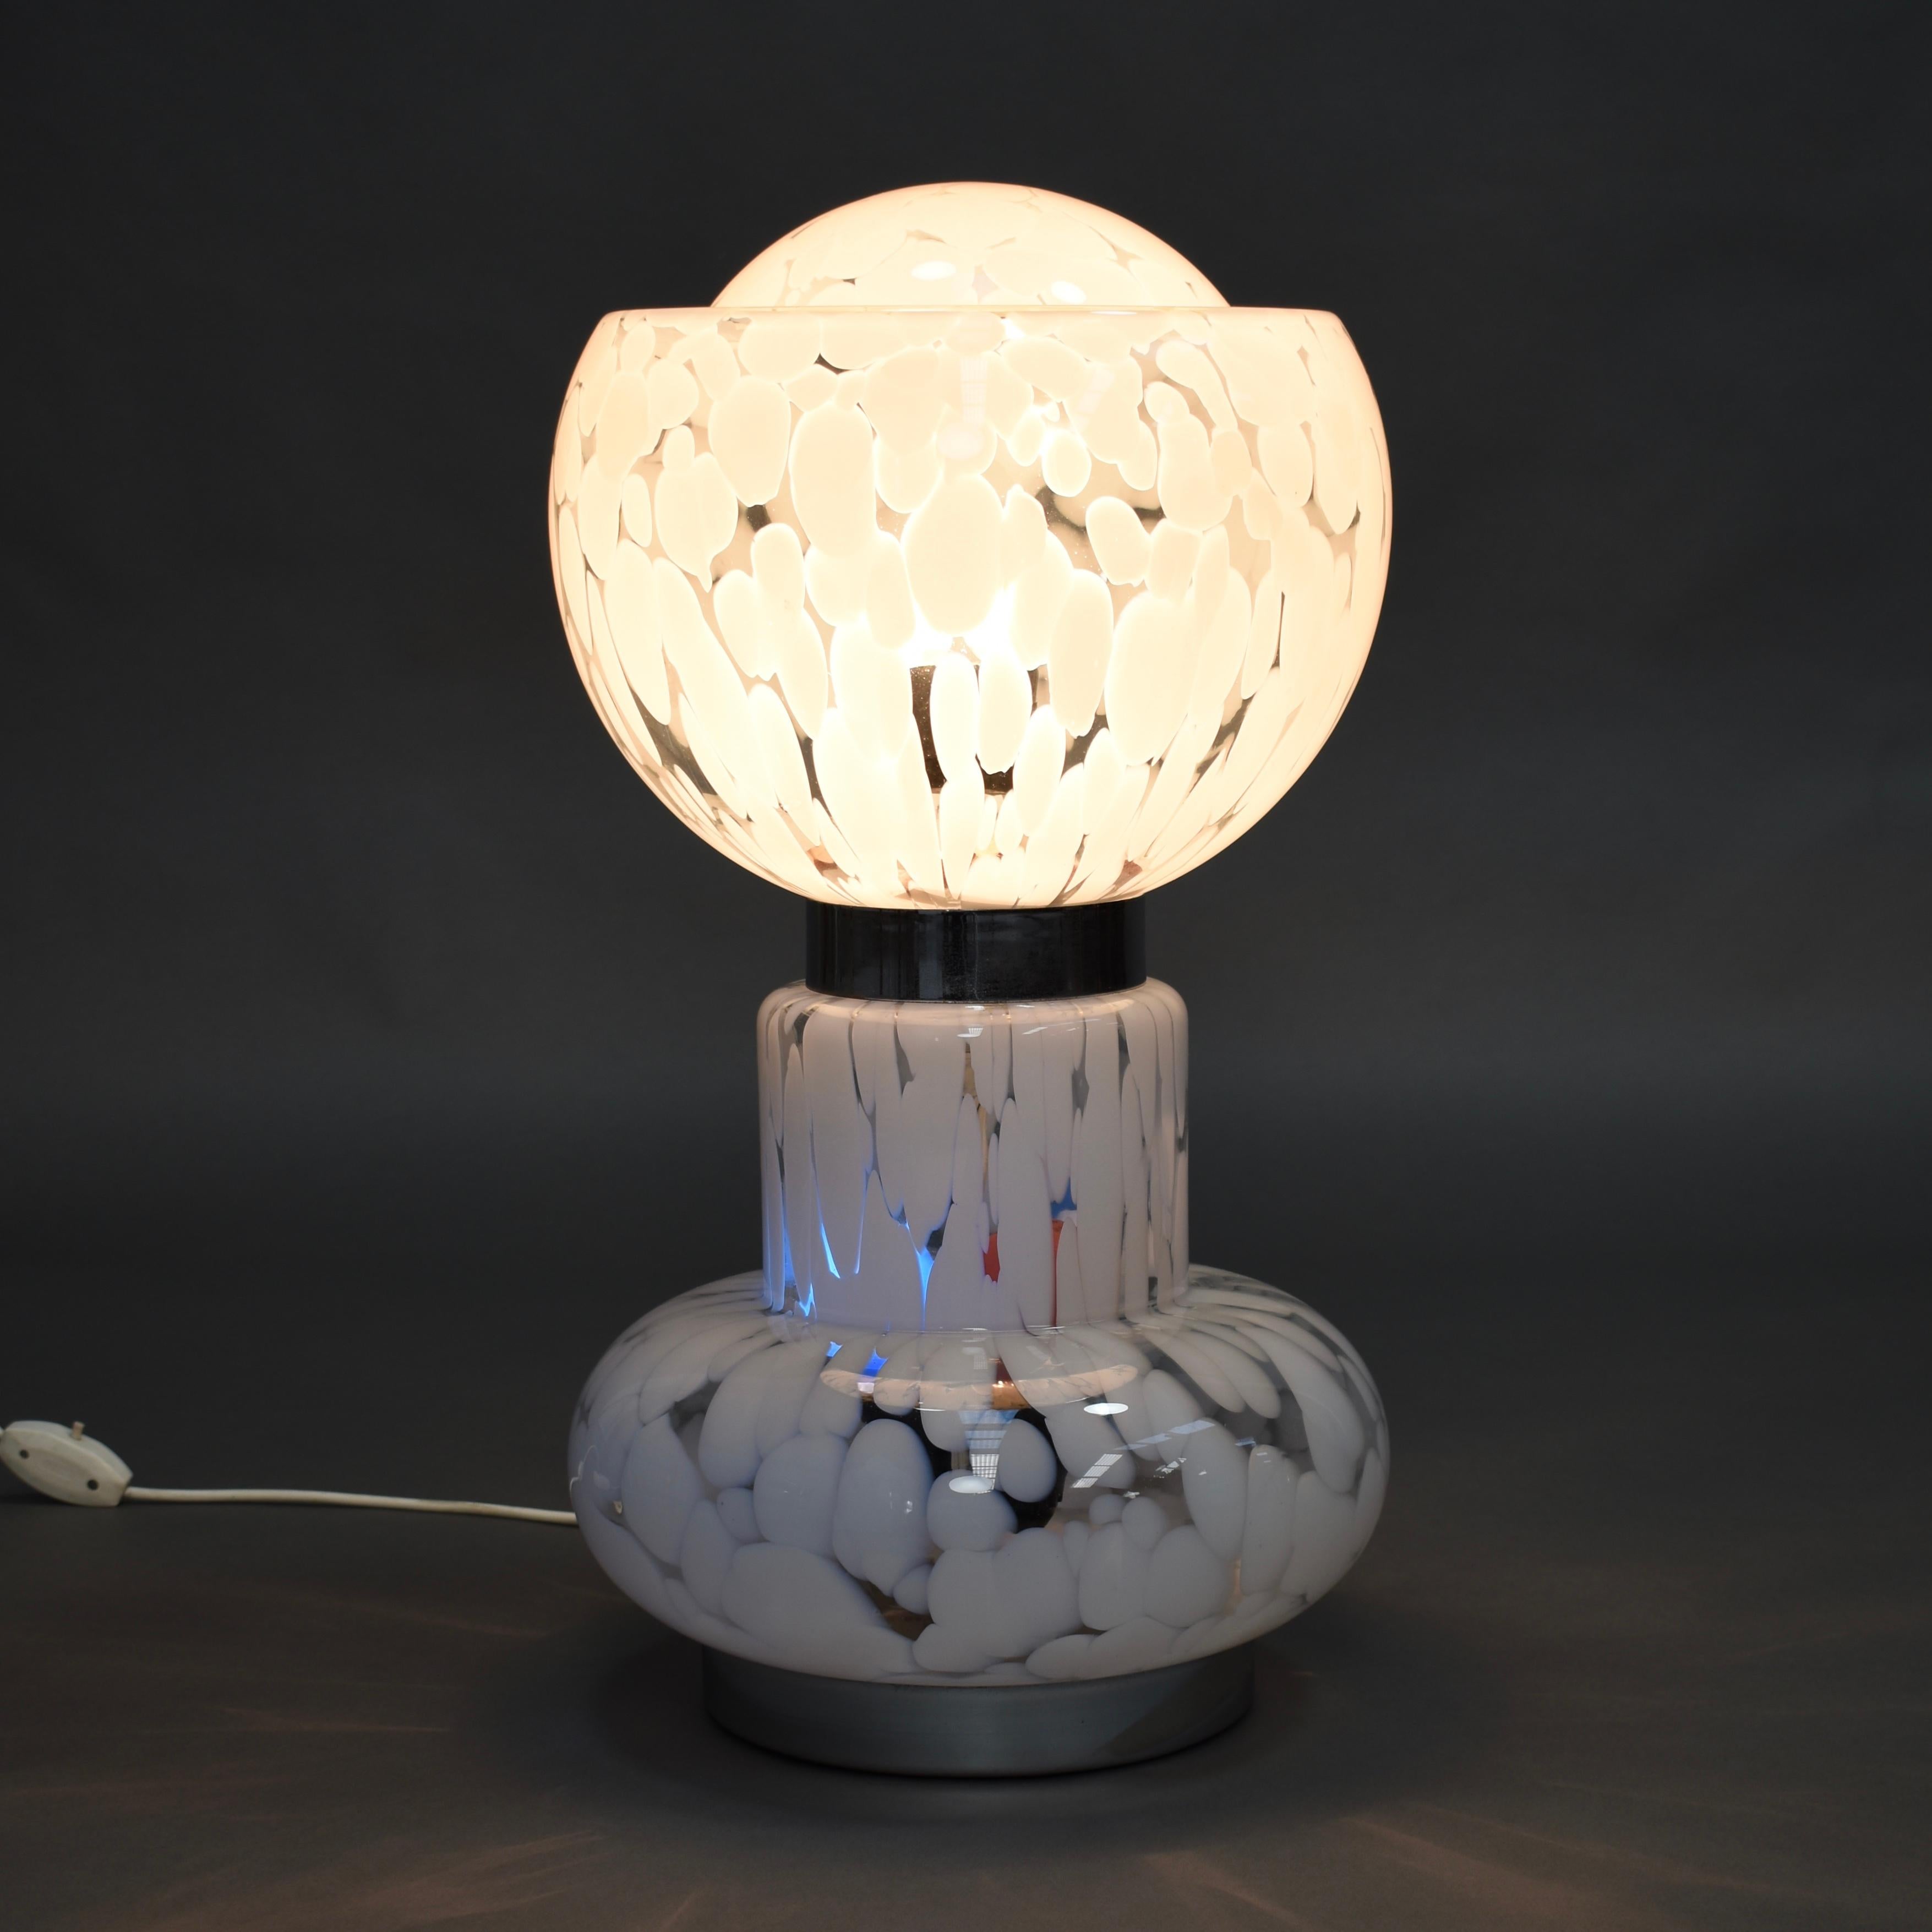 Large Italian Murano glass table lamp, 1970s.
Also available with matching smaller table lamp (not included in this listing).

The lamp features multiple light bulbs (in the upper part and in the lower globe) that can be turned on separate from